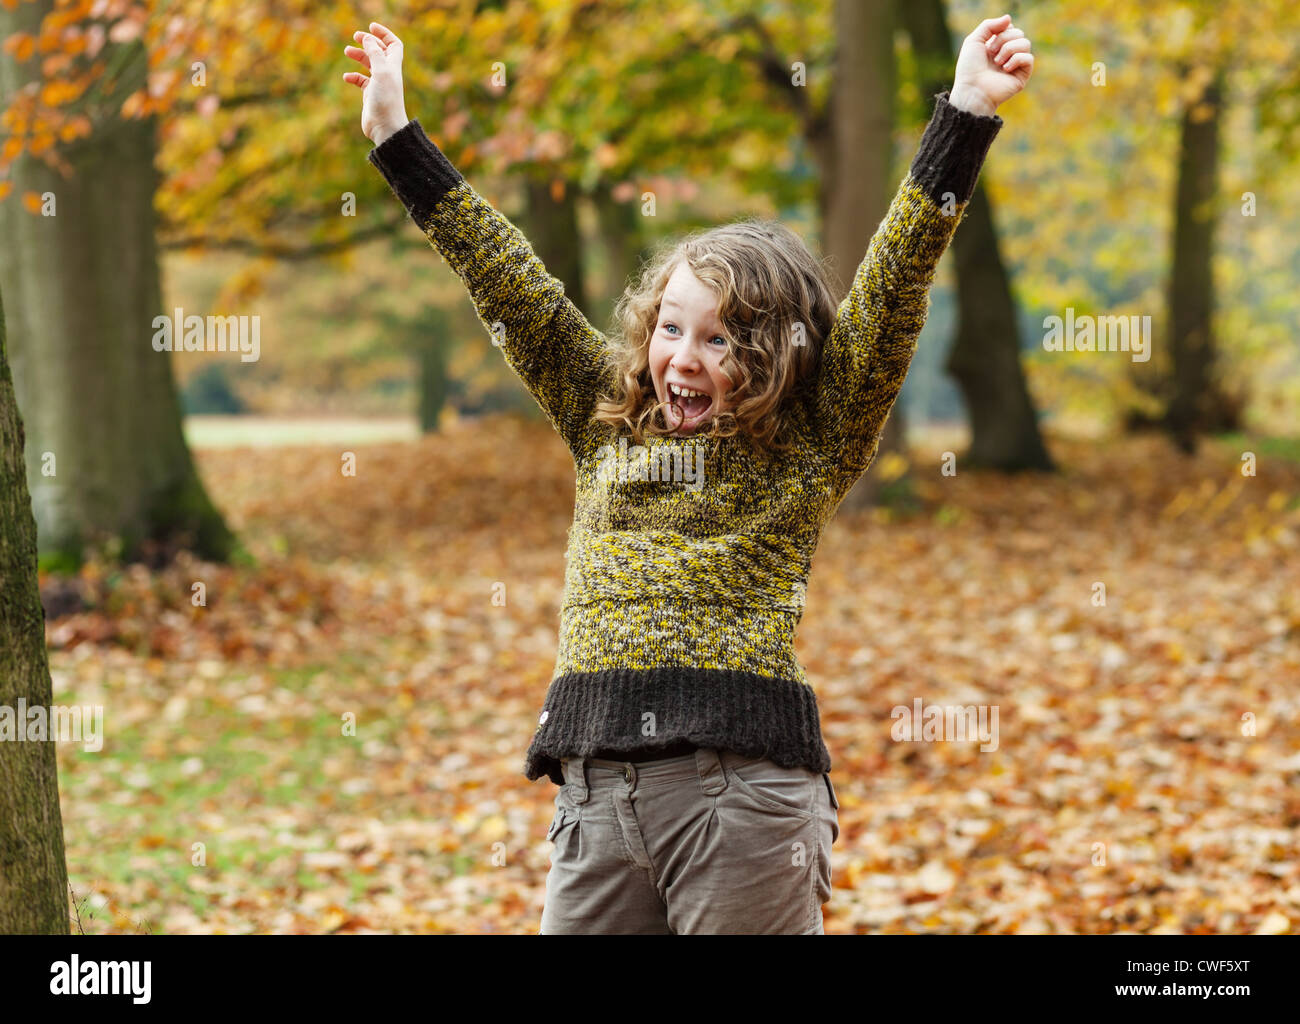 Happily excited teenager girl in an autumn park Stock Photo